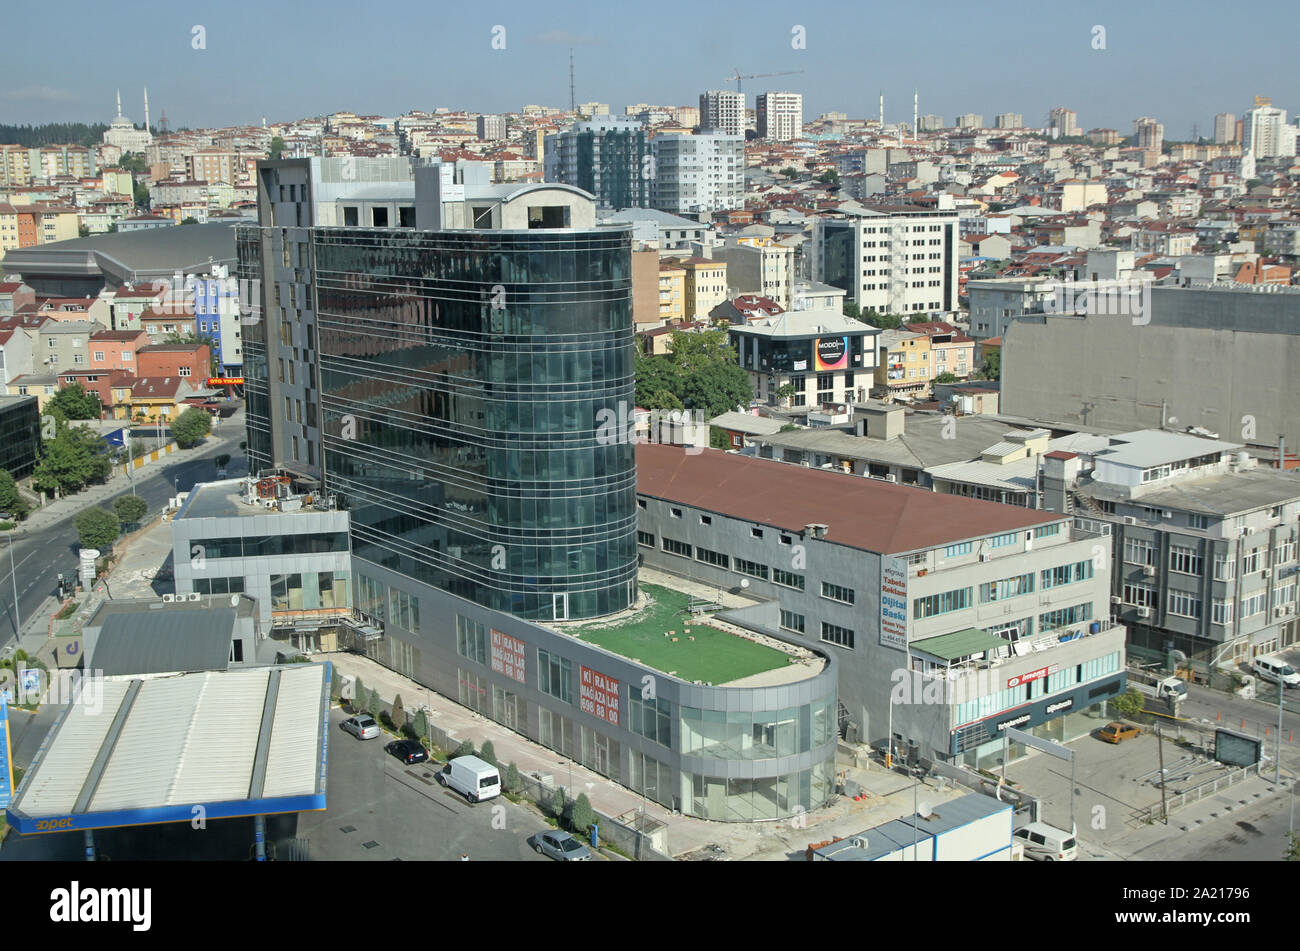 View of Istanbul Residential area with Park Inn by Radisson Ataturk Airport and Opet Aygaz petrol station from Marriott Hotel (Courtyard Istanbul International Airport Hotel), Istanbul, Kucukcekmece District, the Republic of Turkey. Stock Photo